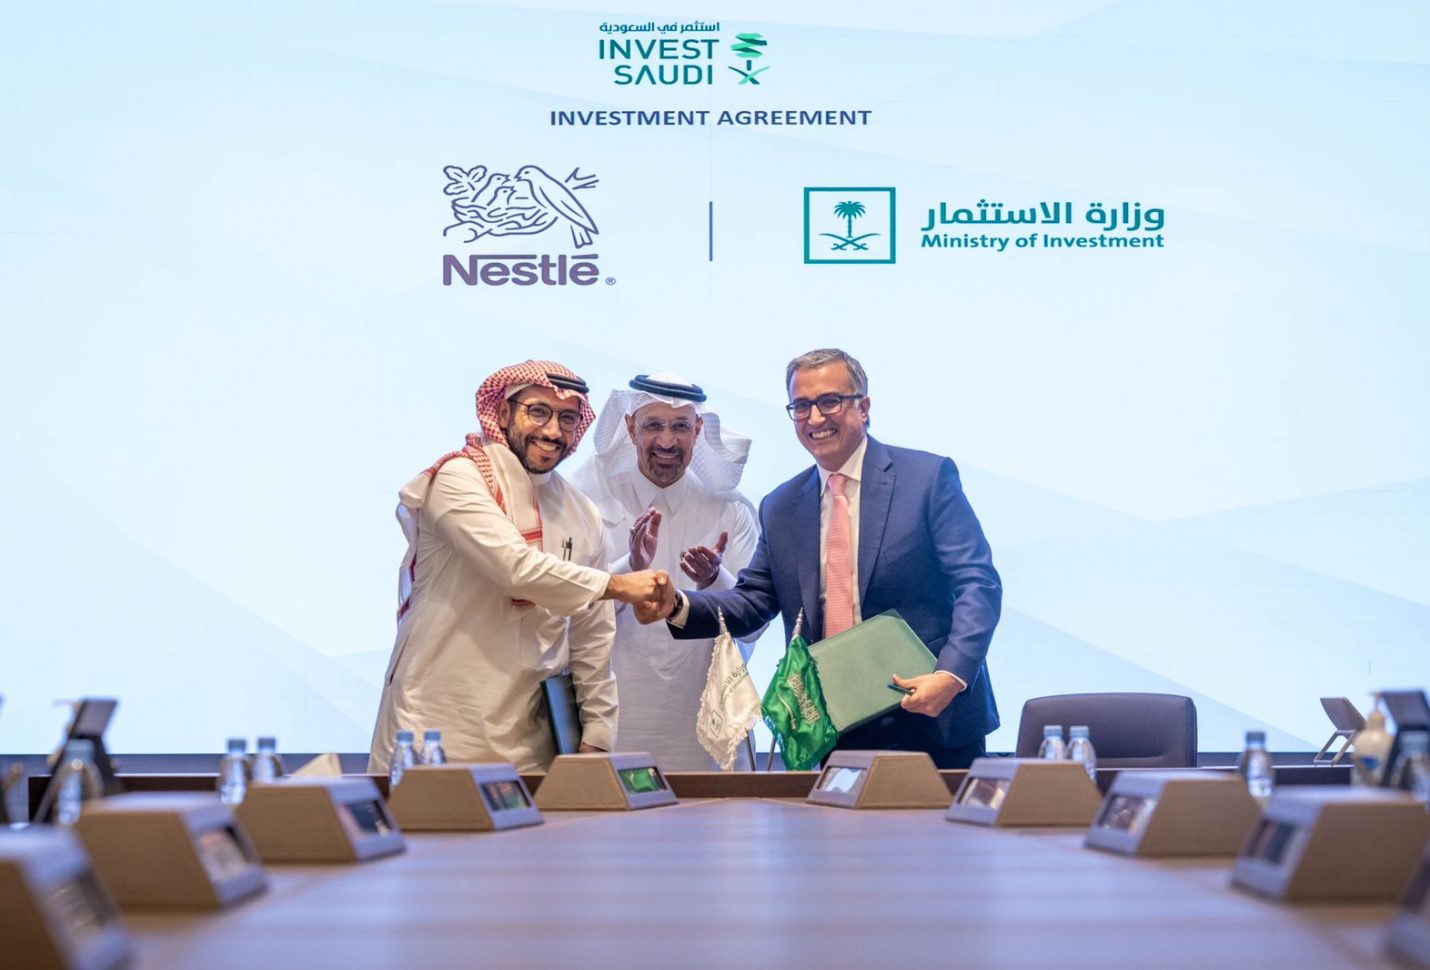 Nestlé’s SAR 7 bn investments in Saudi Arabia to its Vision 2030